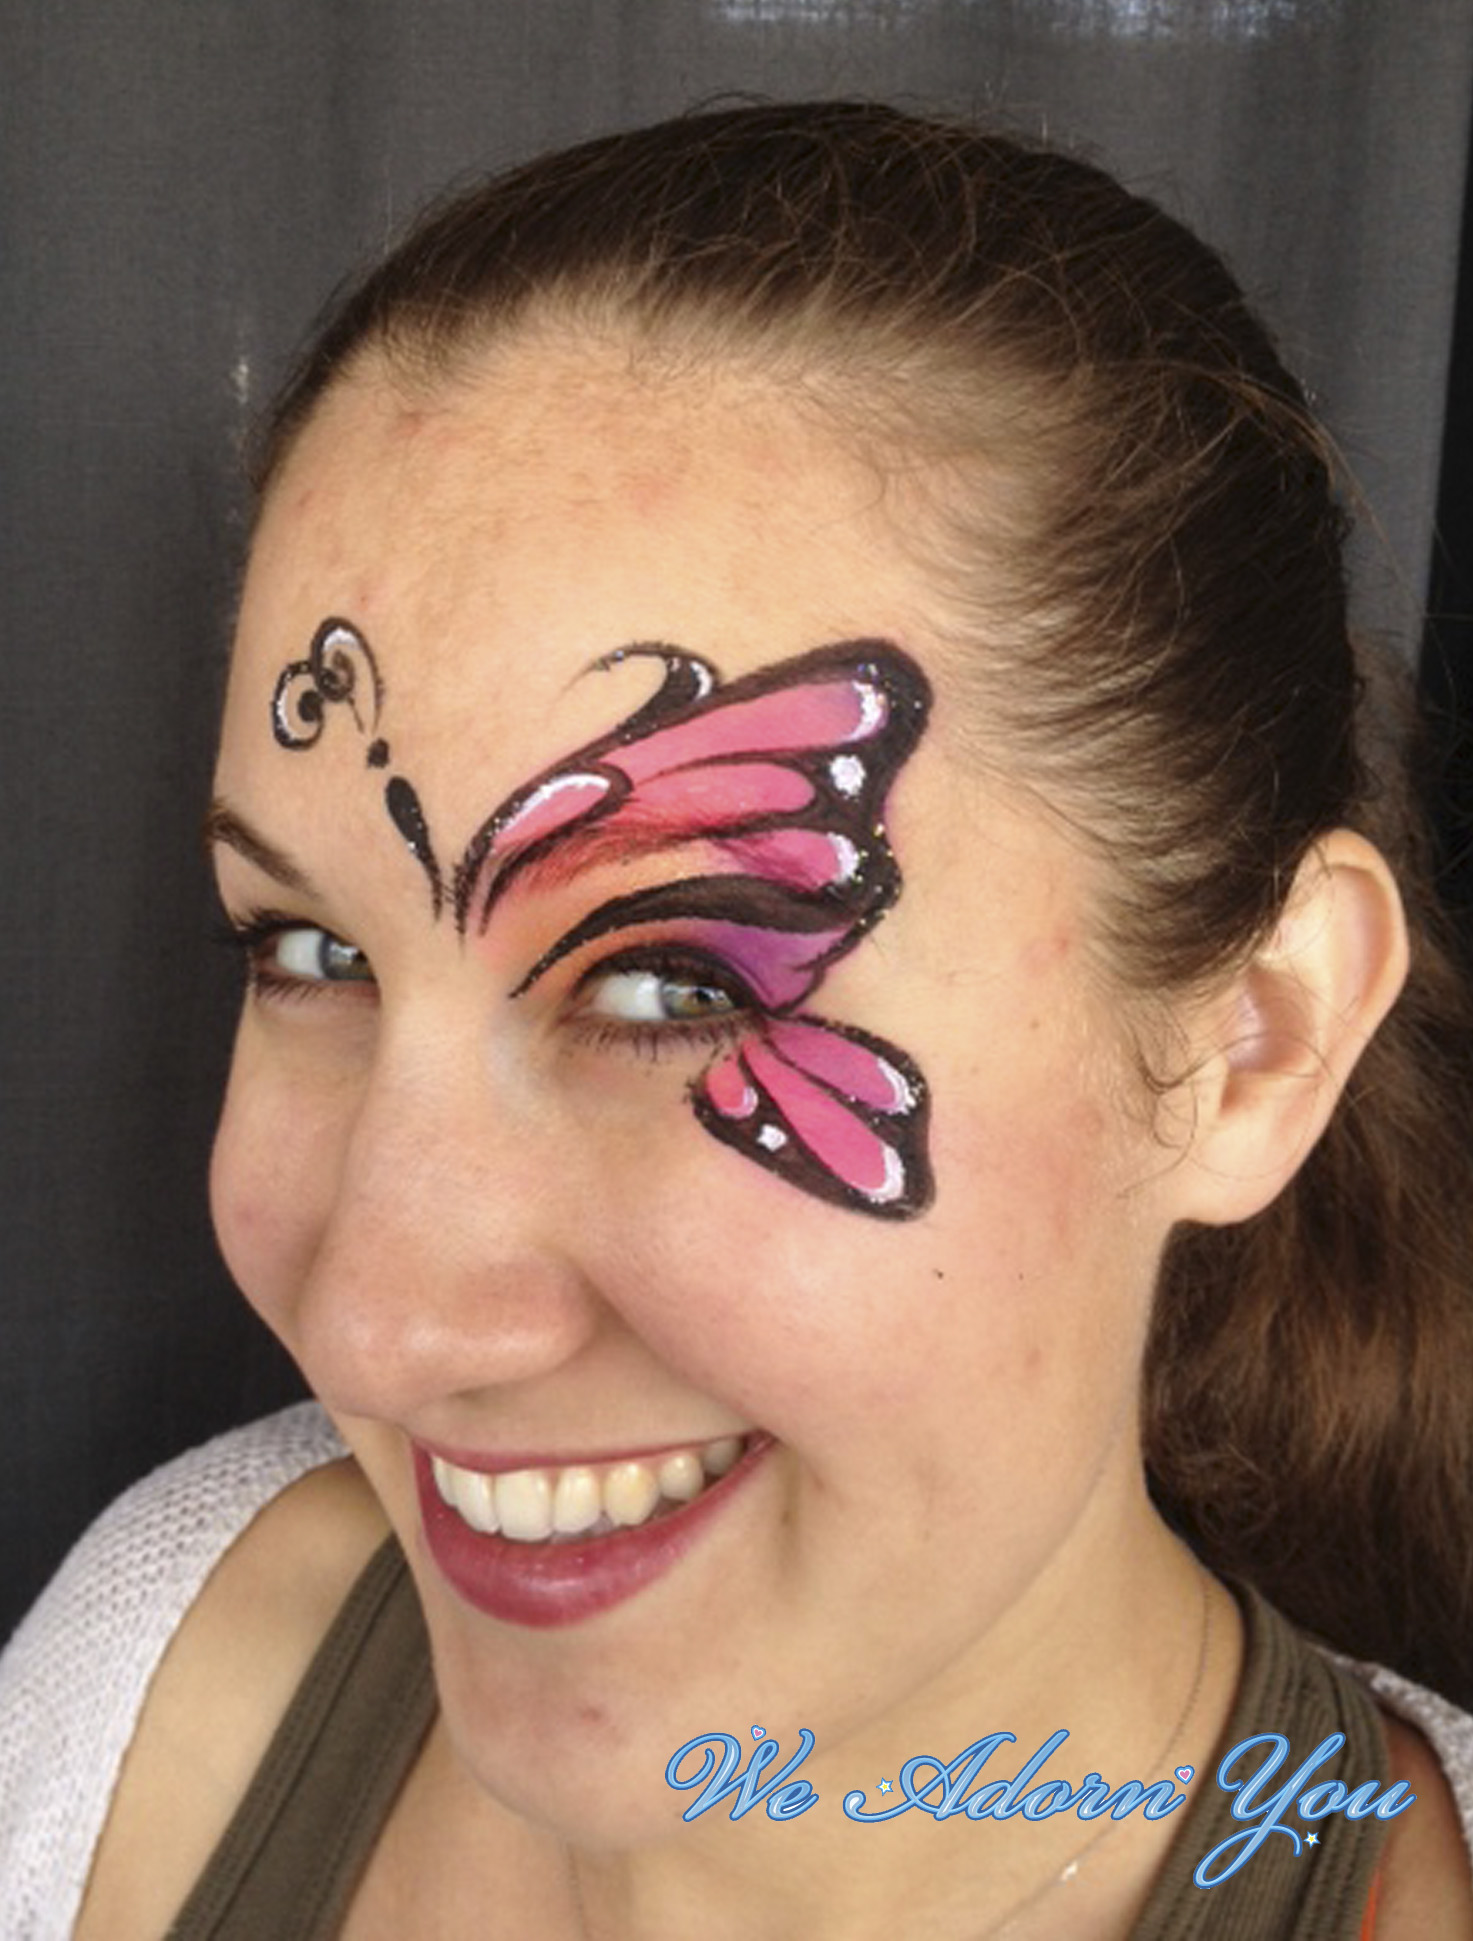 The Pink Butterfly is my most requested girly face paint design 💗 #fa